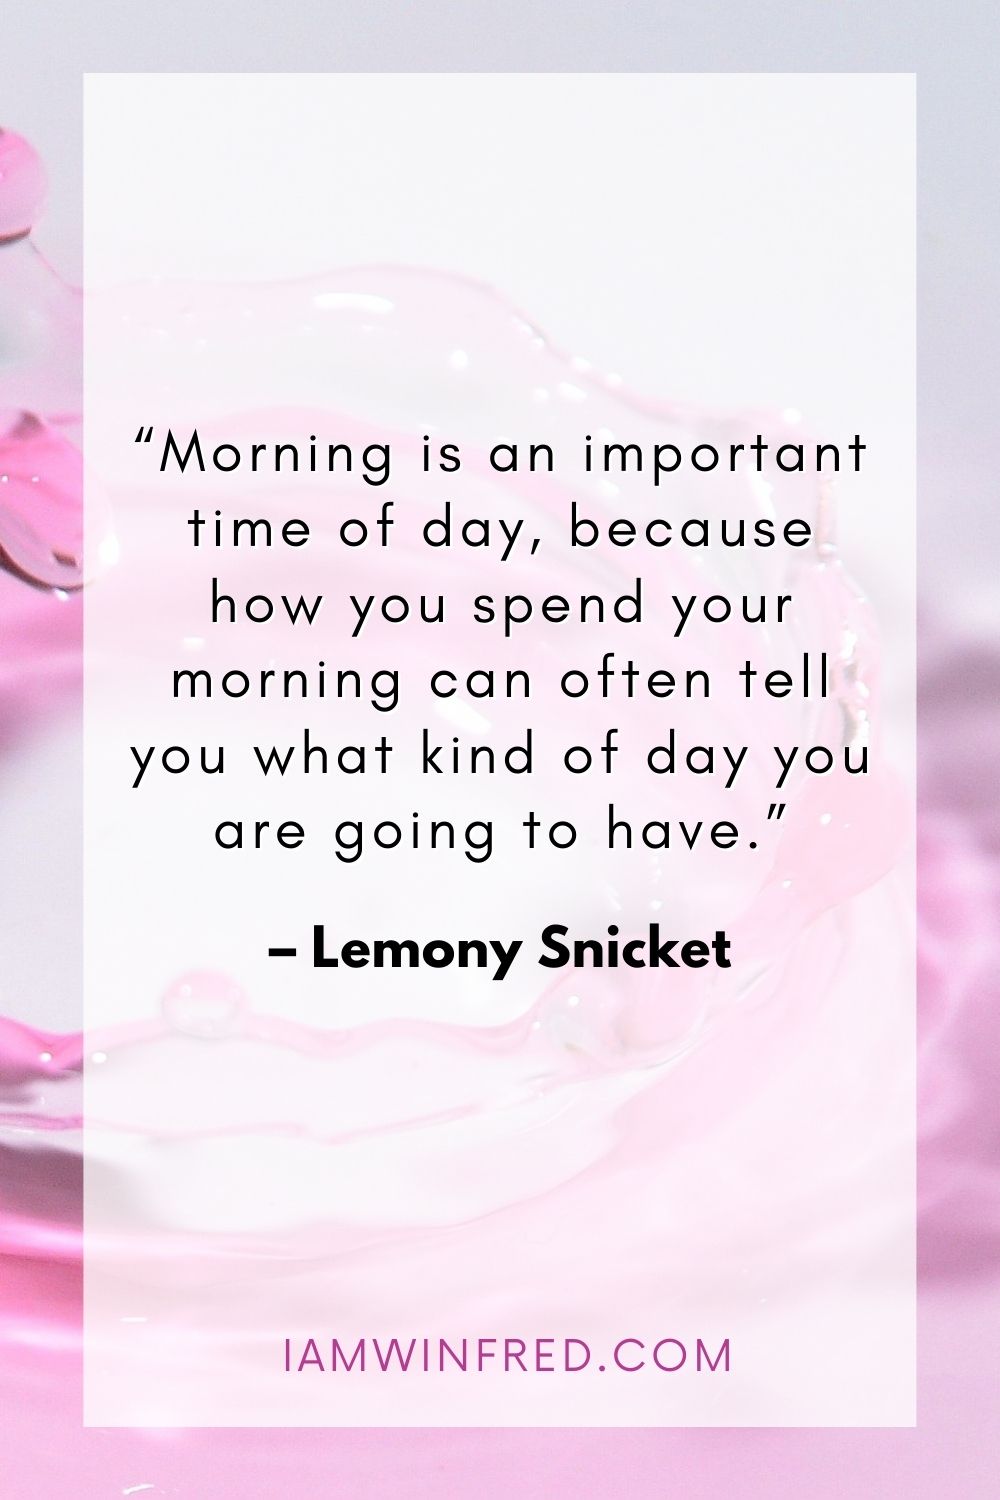 Morning Is An Important Time Of Day Because How You Spend Your Morning Can Often Tell You What Kind Of Day You Are Going To Have.